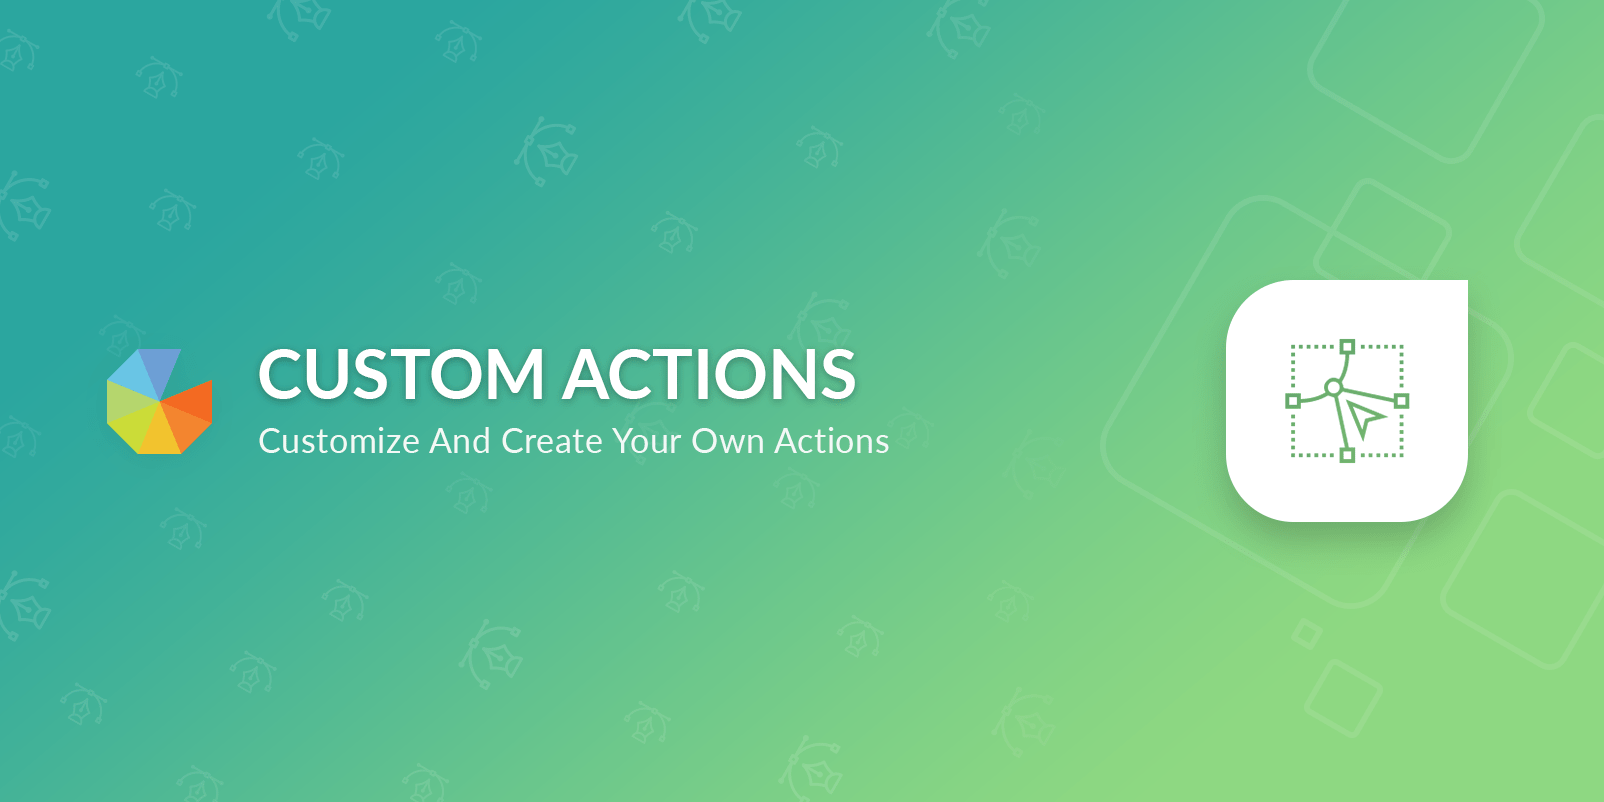 Custom actions, customize and create your own actions